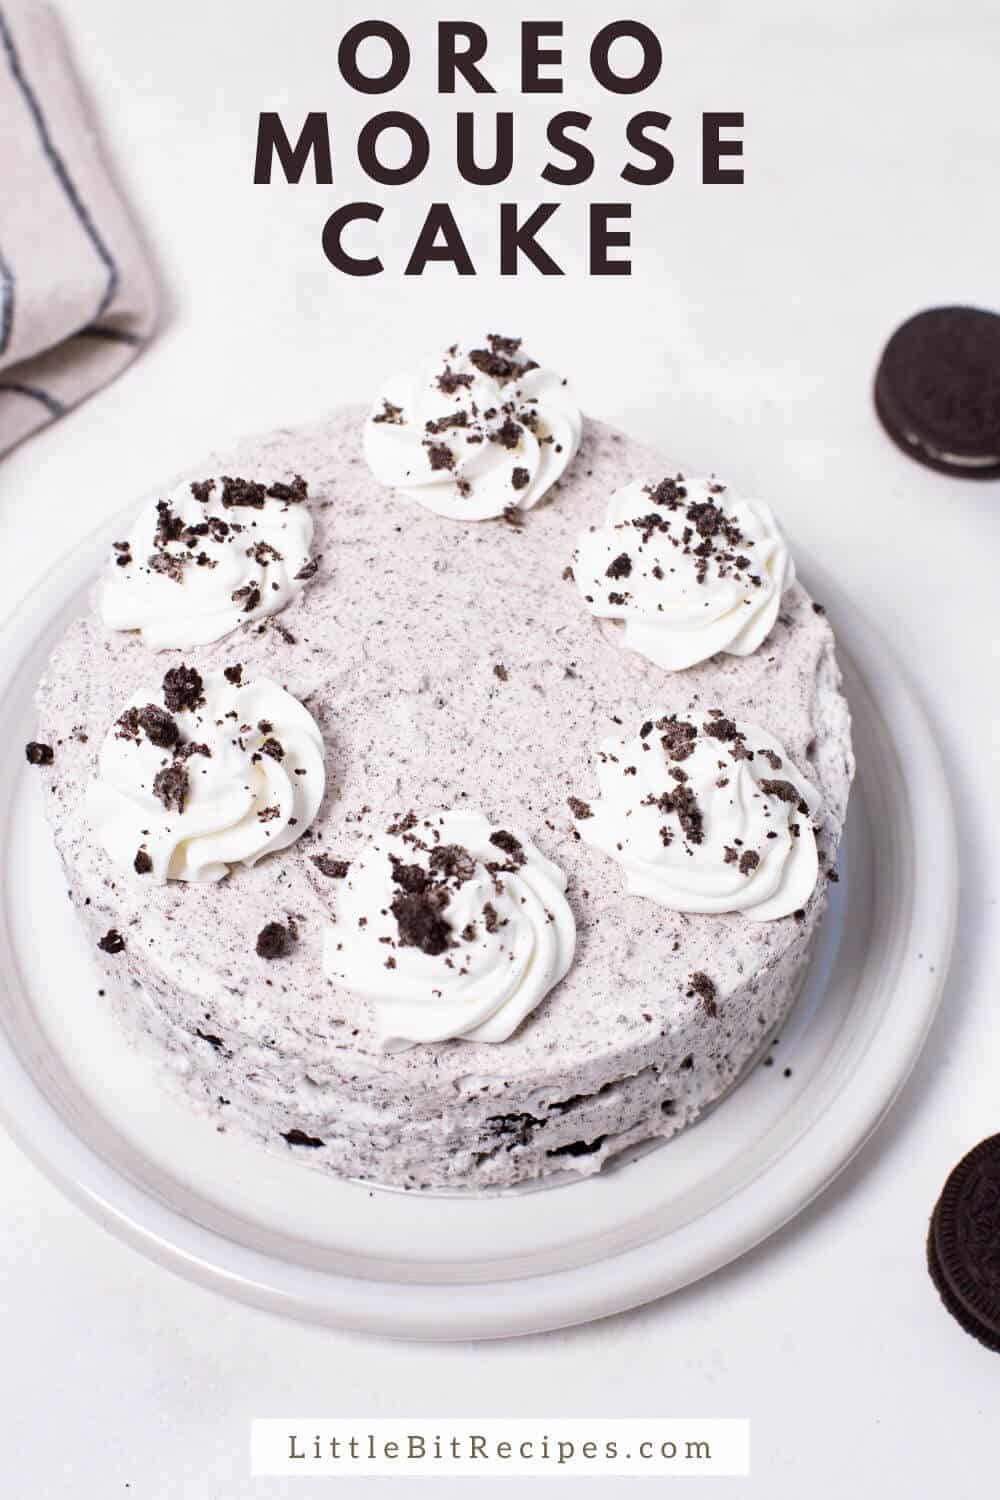 oreo mousse cake with text.